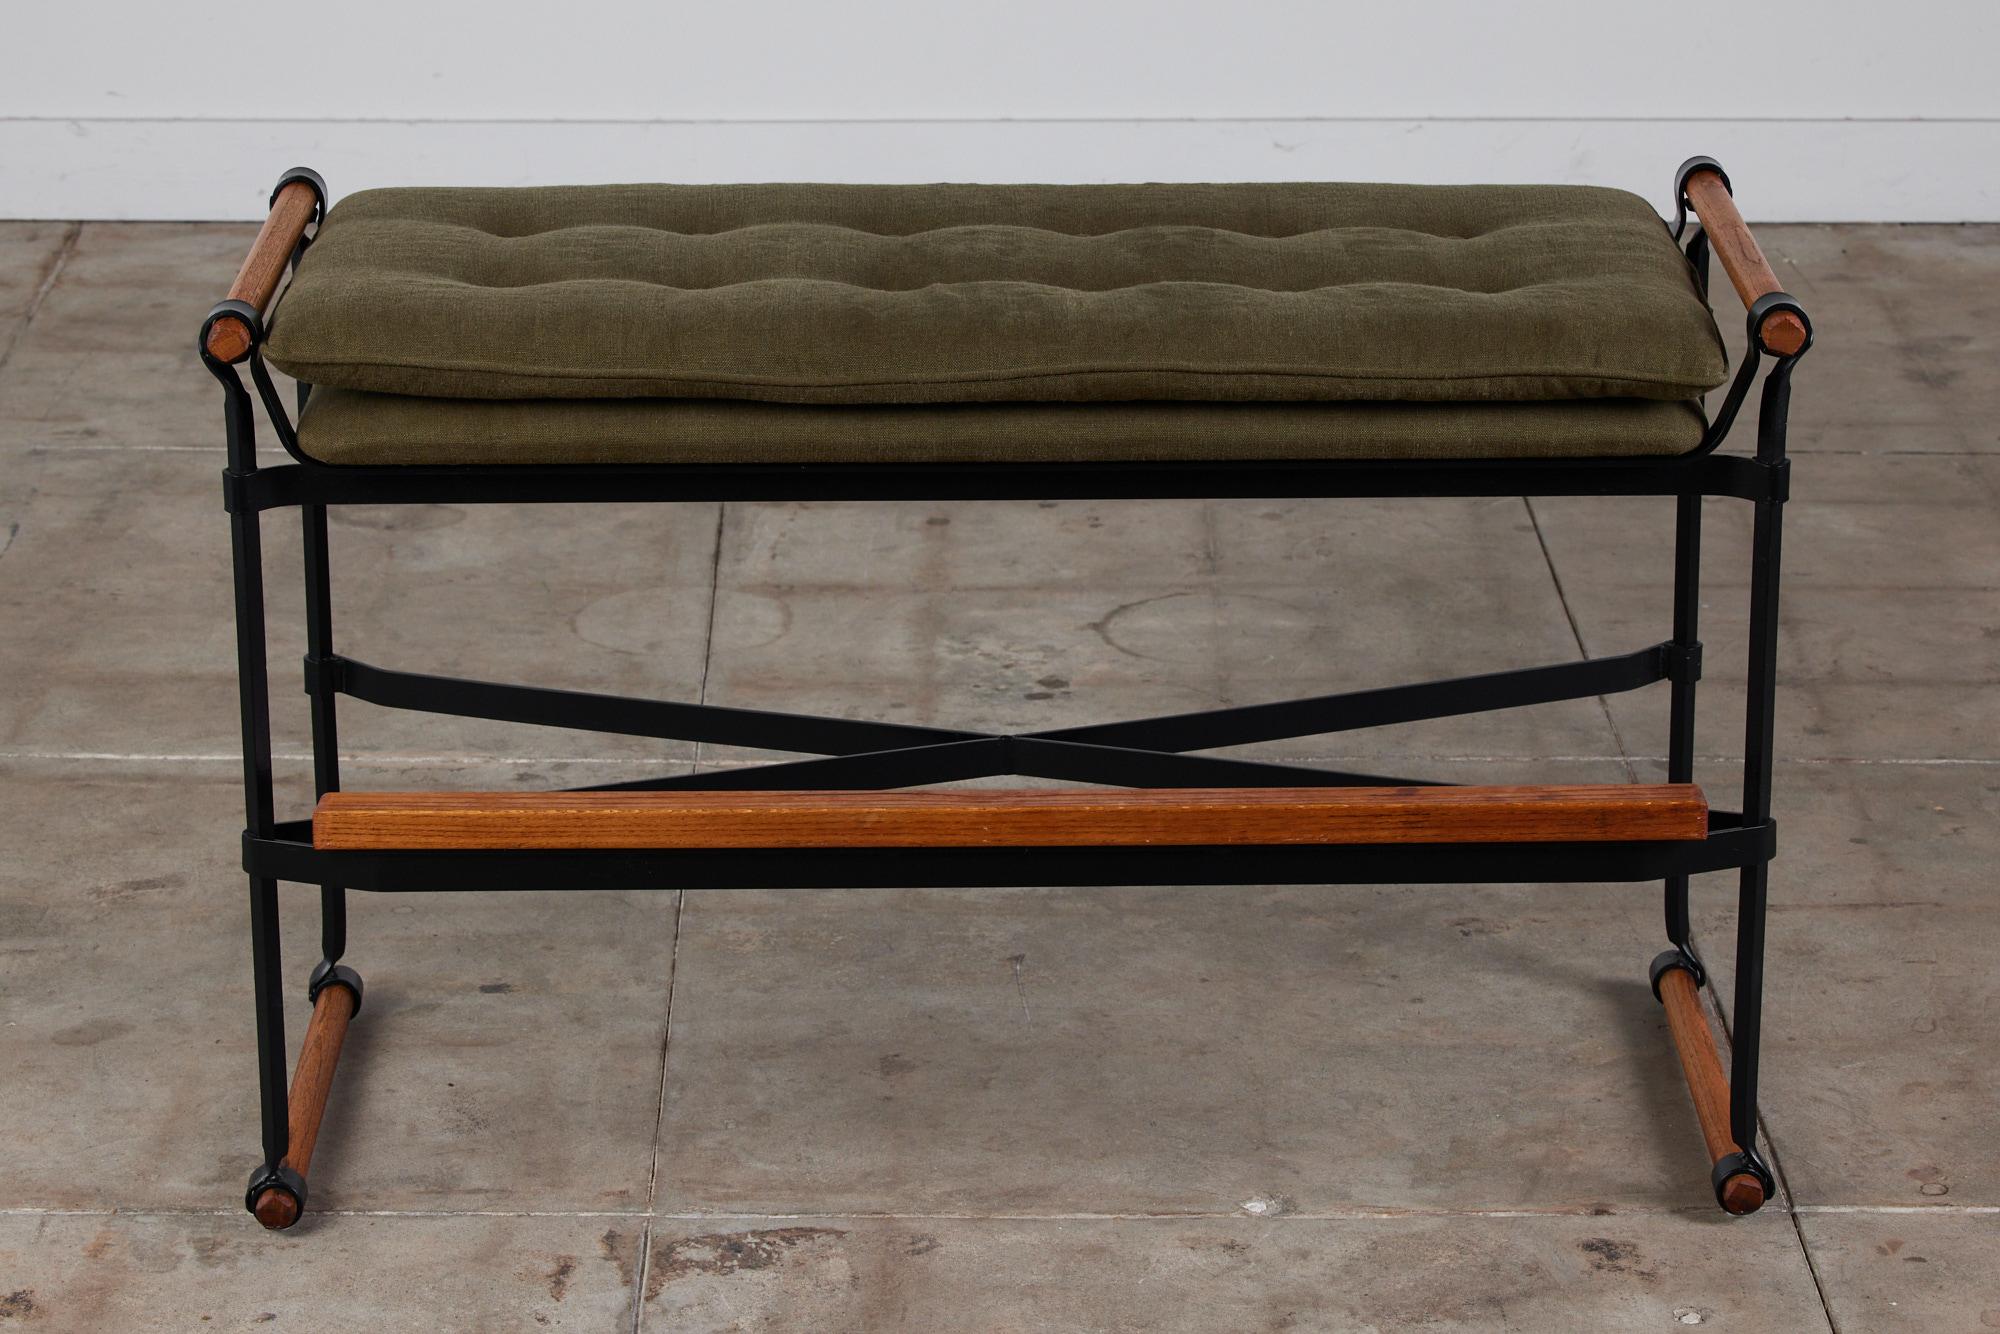 A Cleo Baldon bar height bench for Terra, USA, c.1960s. The bench features a wrought iron x-base. It is grounded by rounded dowels with the same design element mirrored at the seat cushion. A rectangular block bar runs the length of the bench